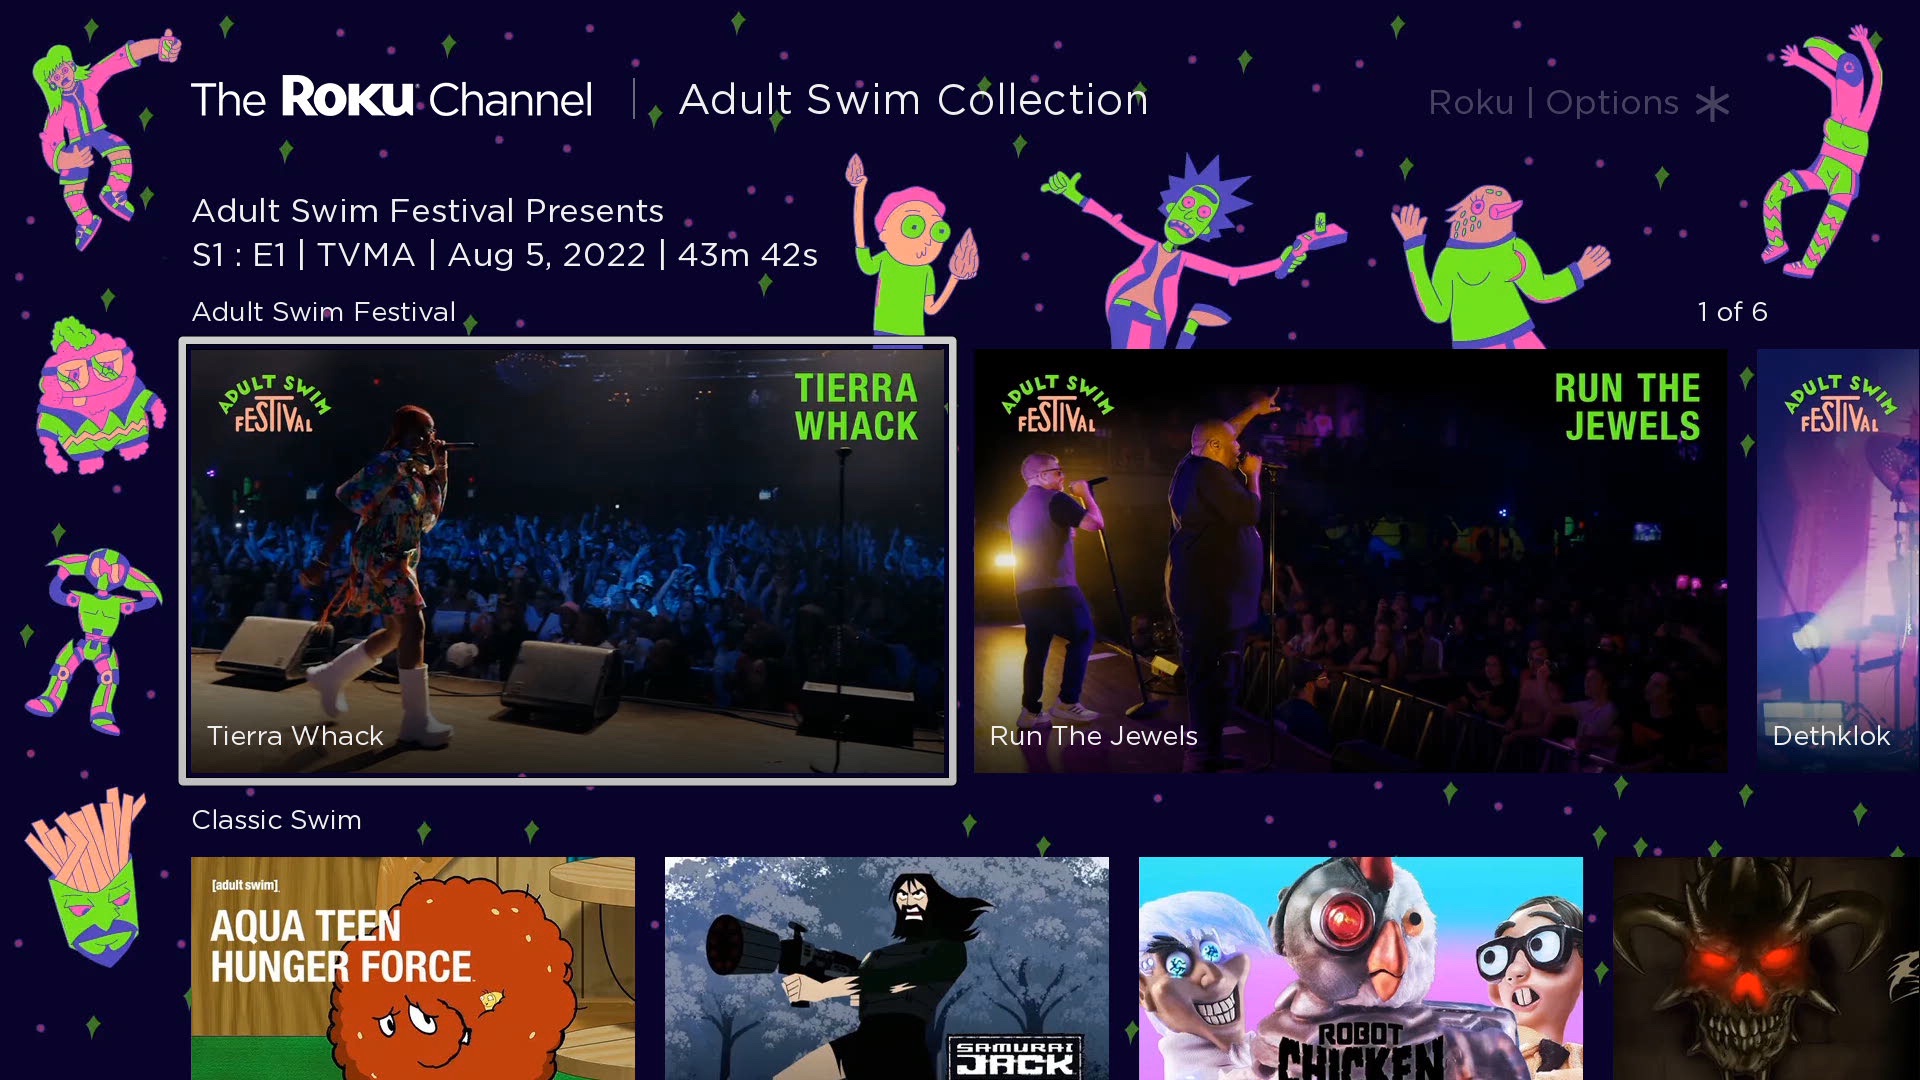 The Roku Channel Will Stream the Adult Swim Festival & Add 120 Adult Swim  Episodes | Cord Cutters News